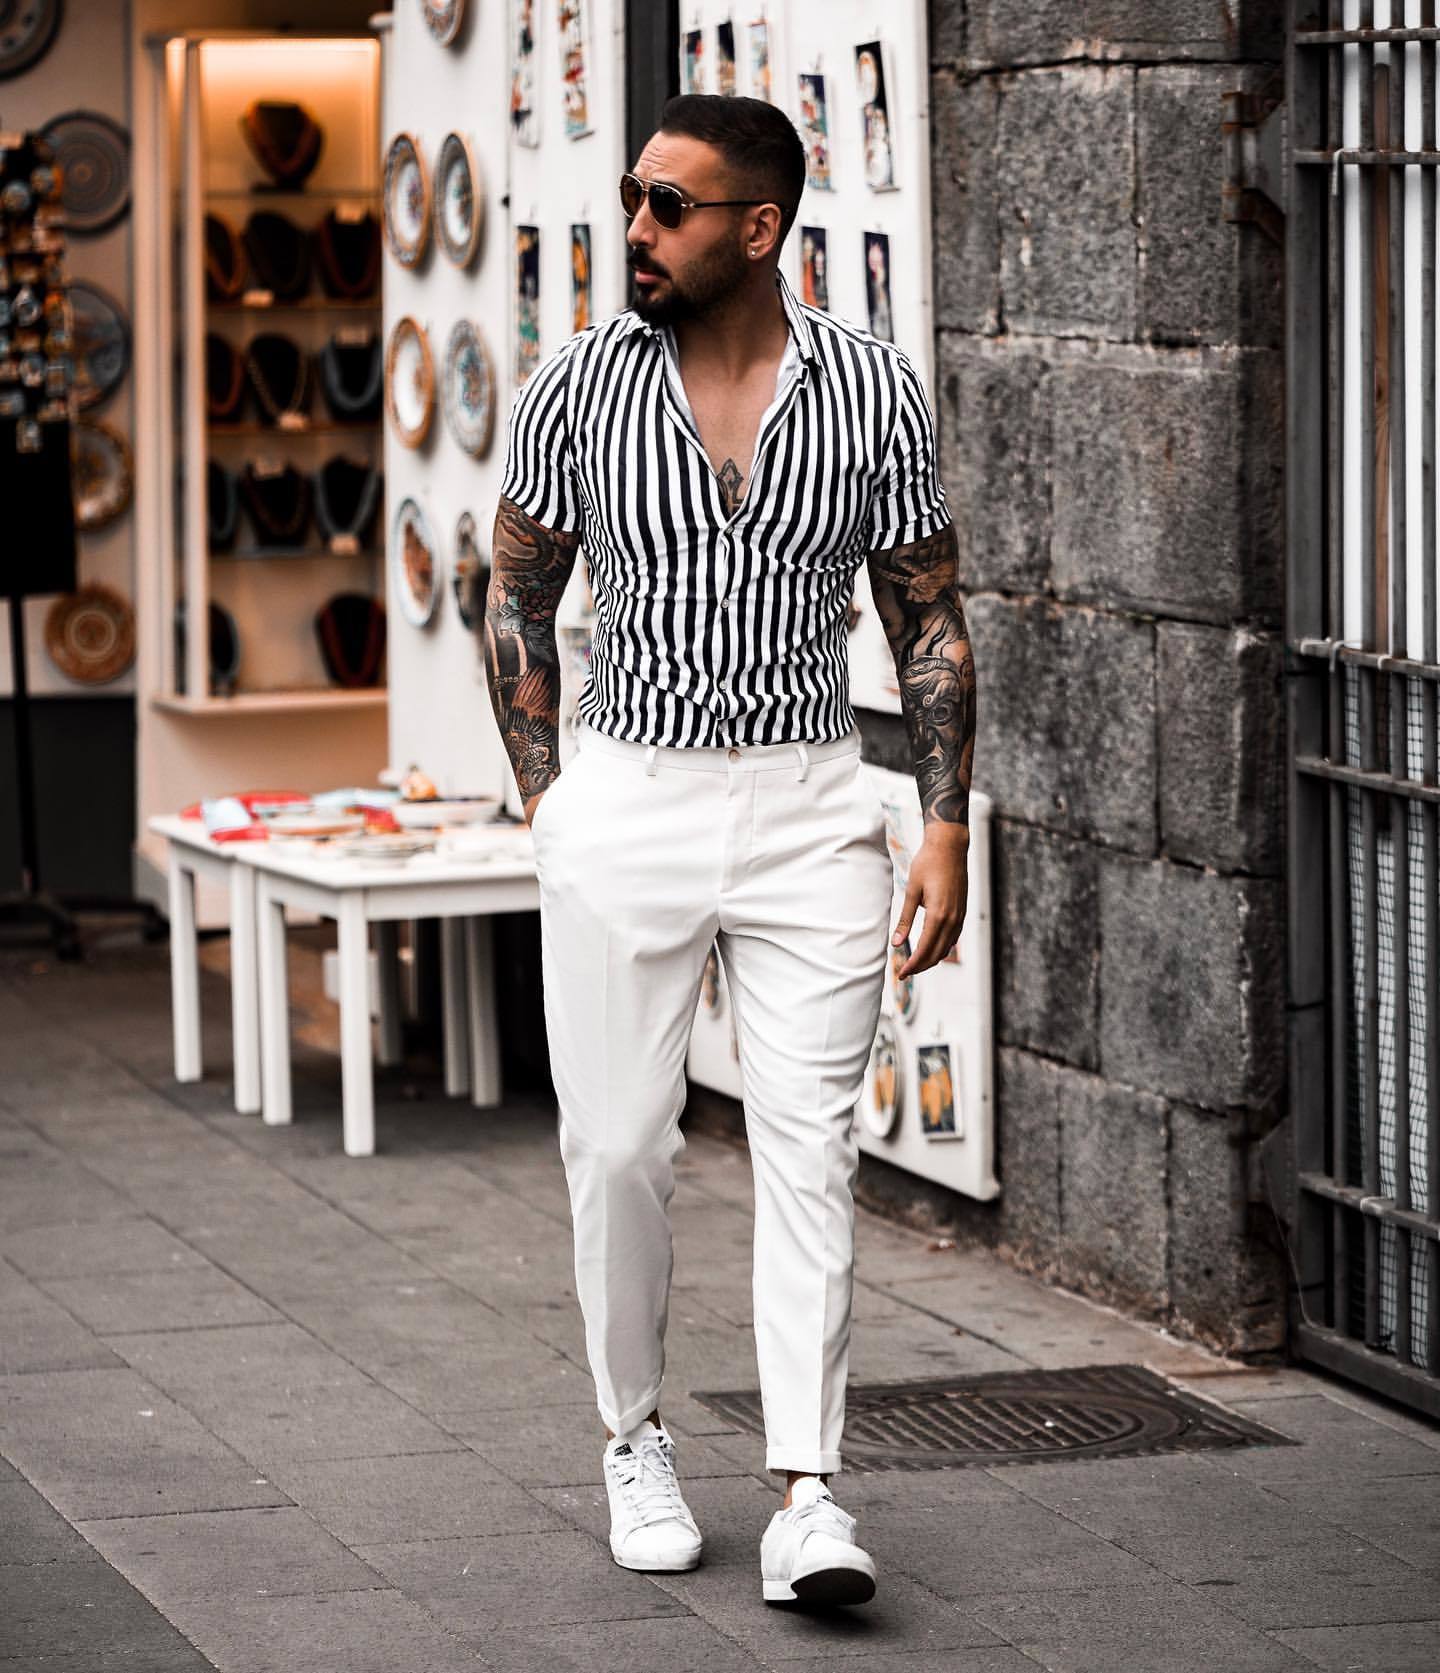 Pink and White Striped Shirt with Sneakers | Hockerty